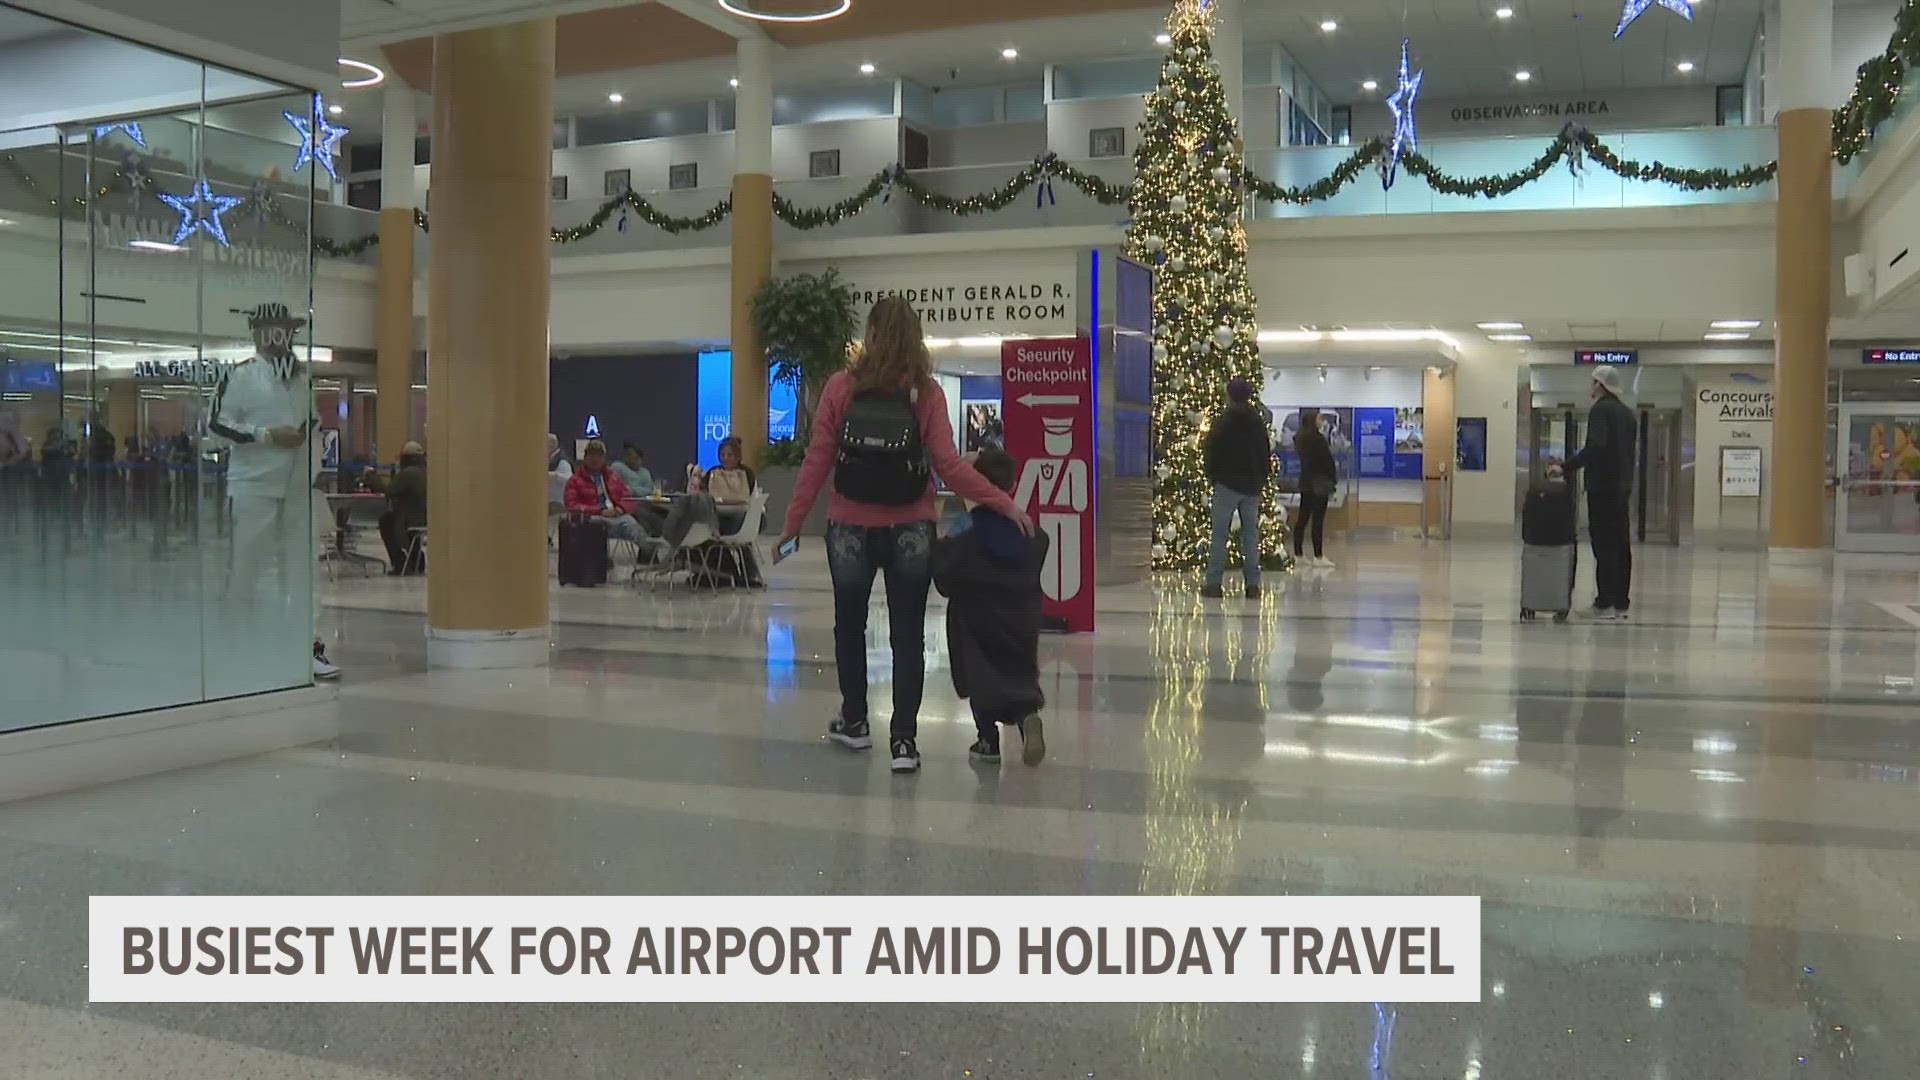 The holiday rush is officially underway with people heading to the airport to spend time with their families for the holidays.